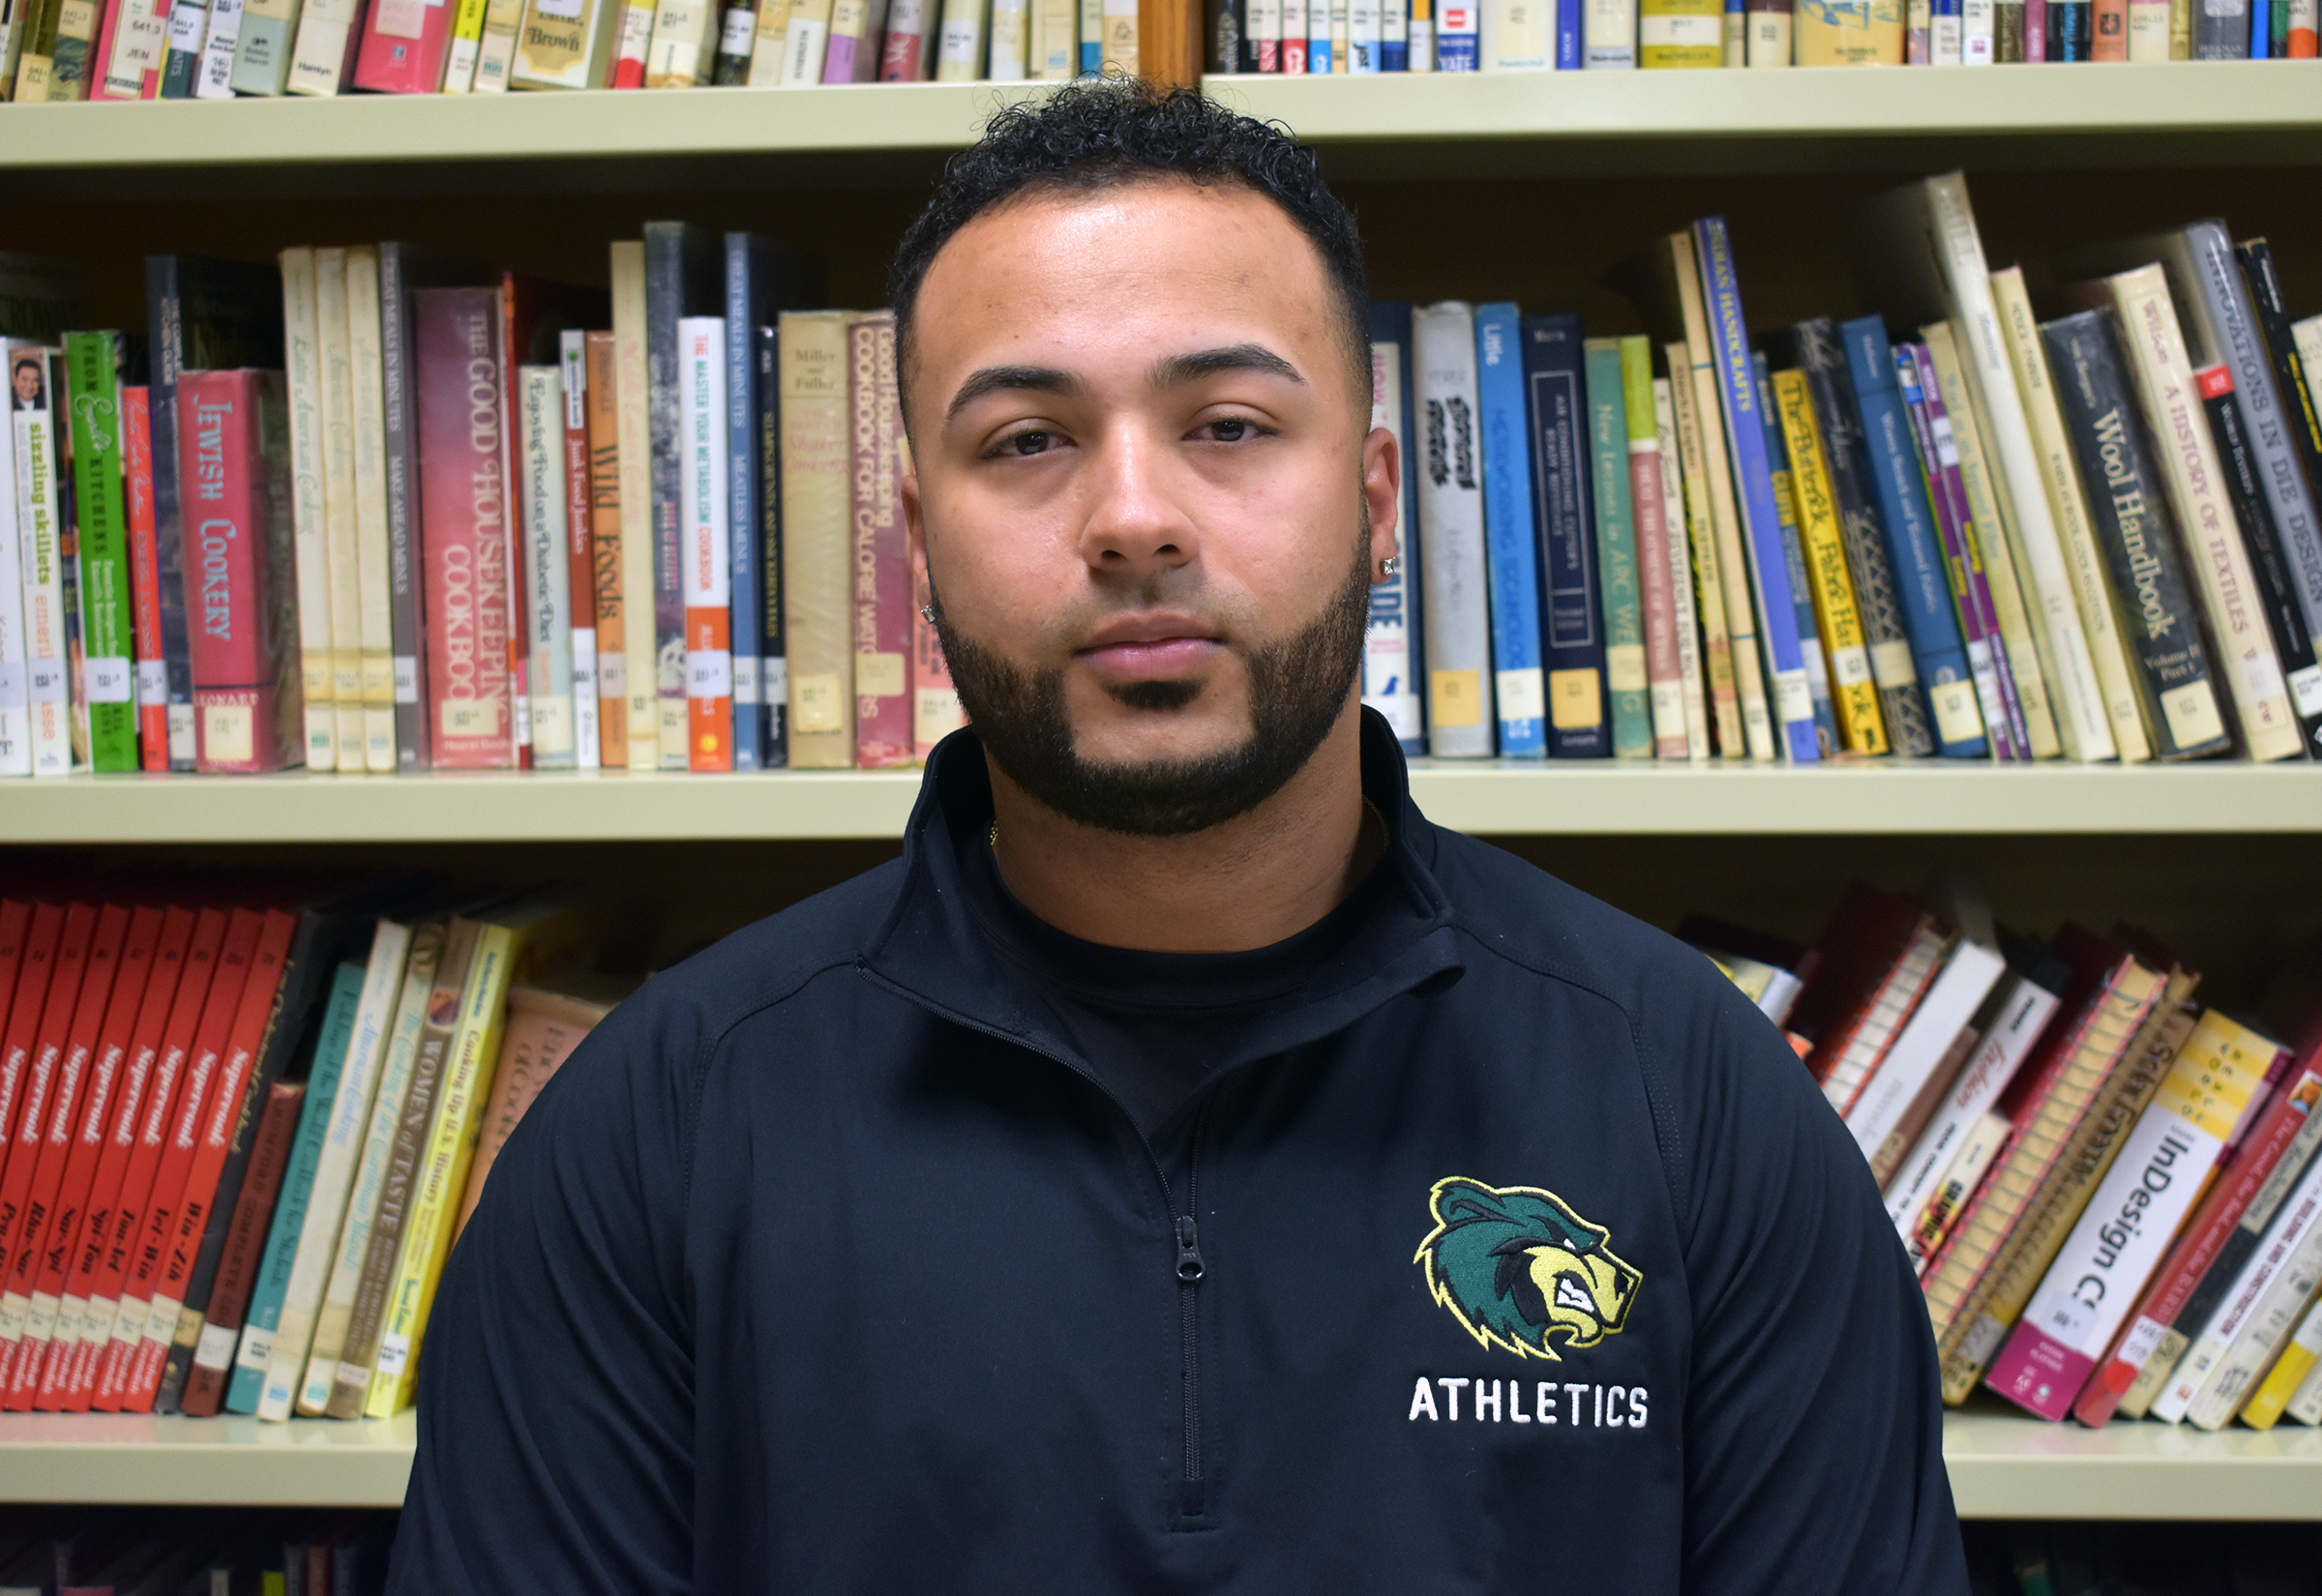 Athletic Director of the school